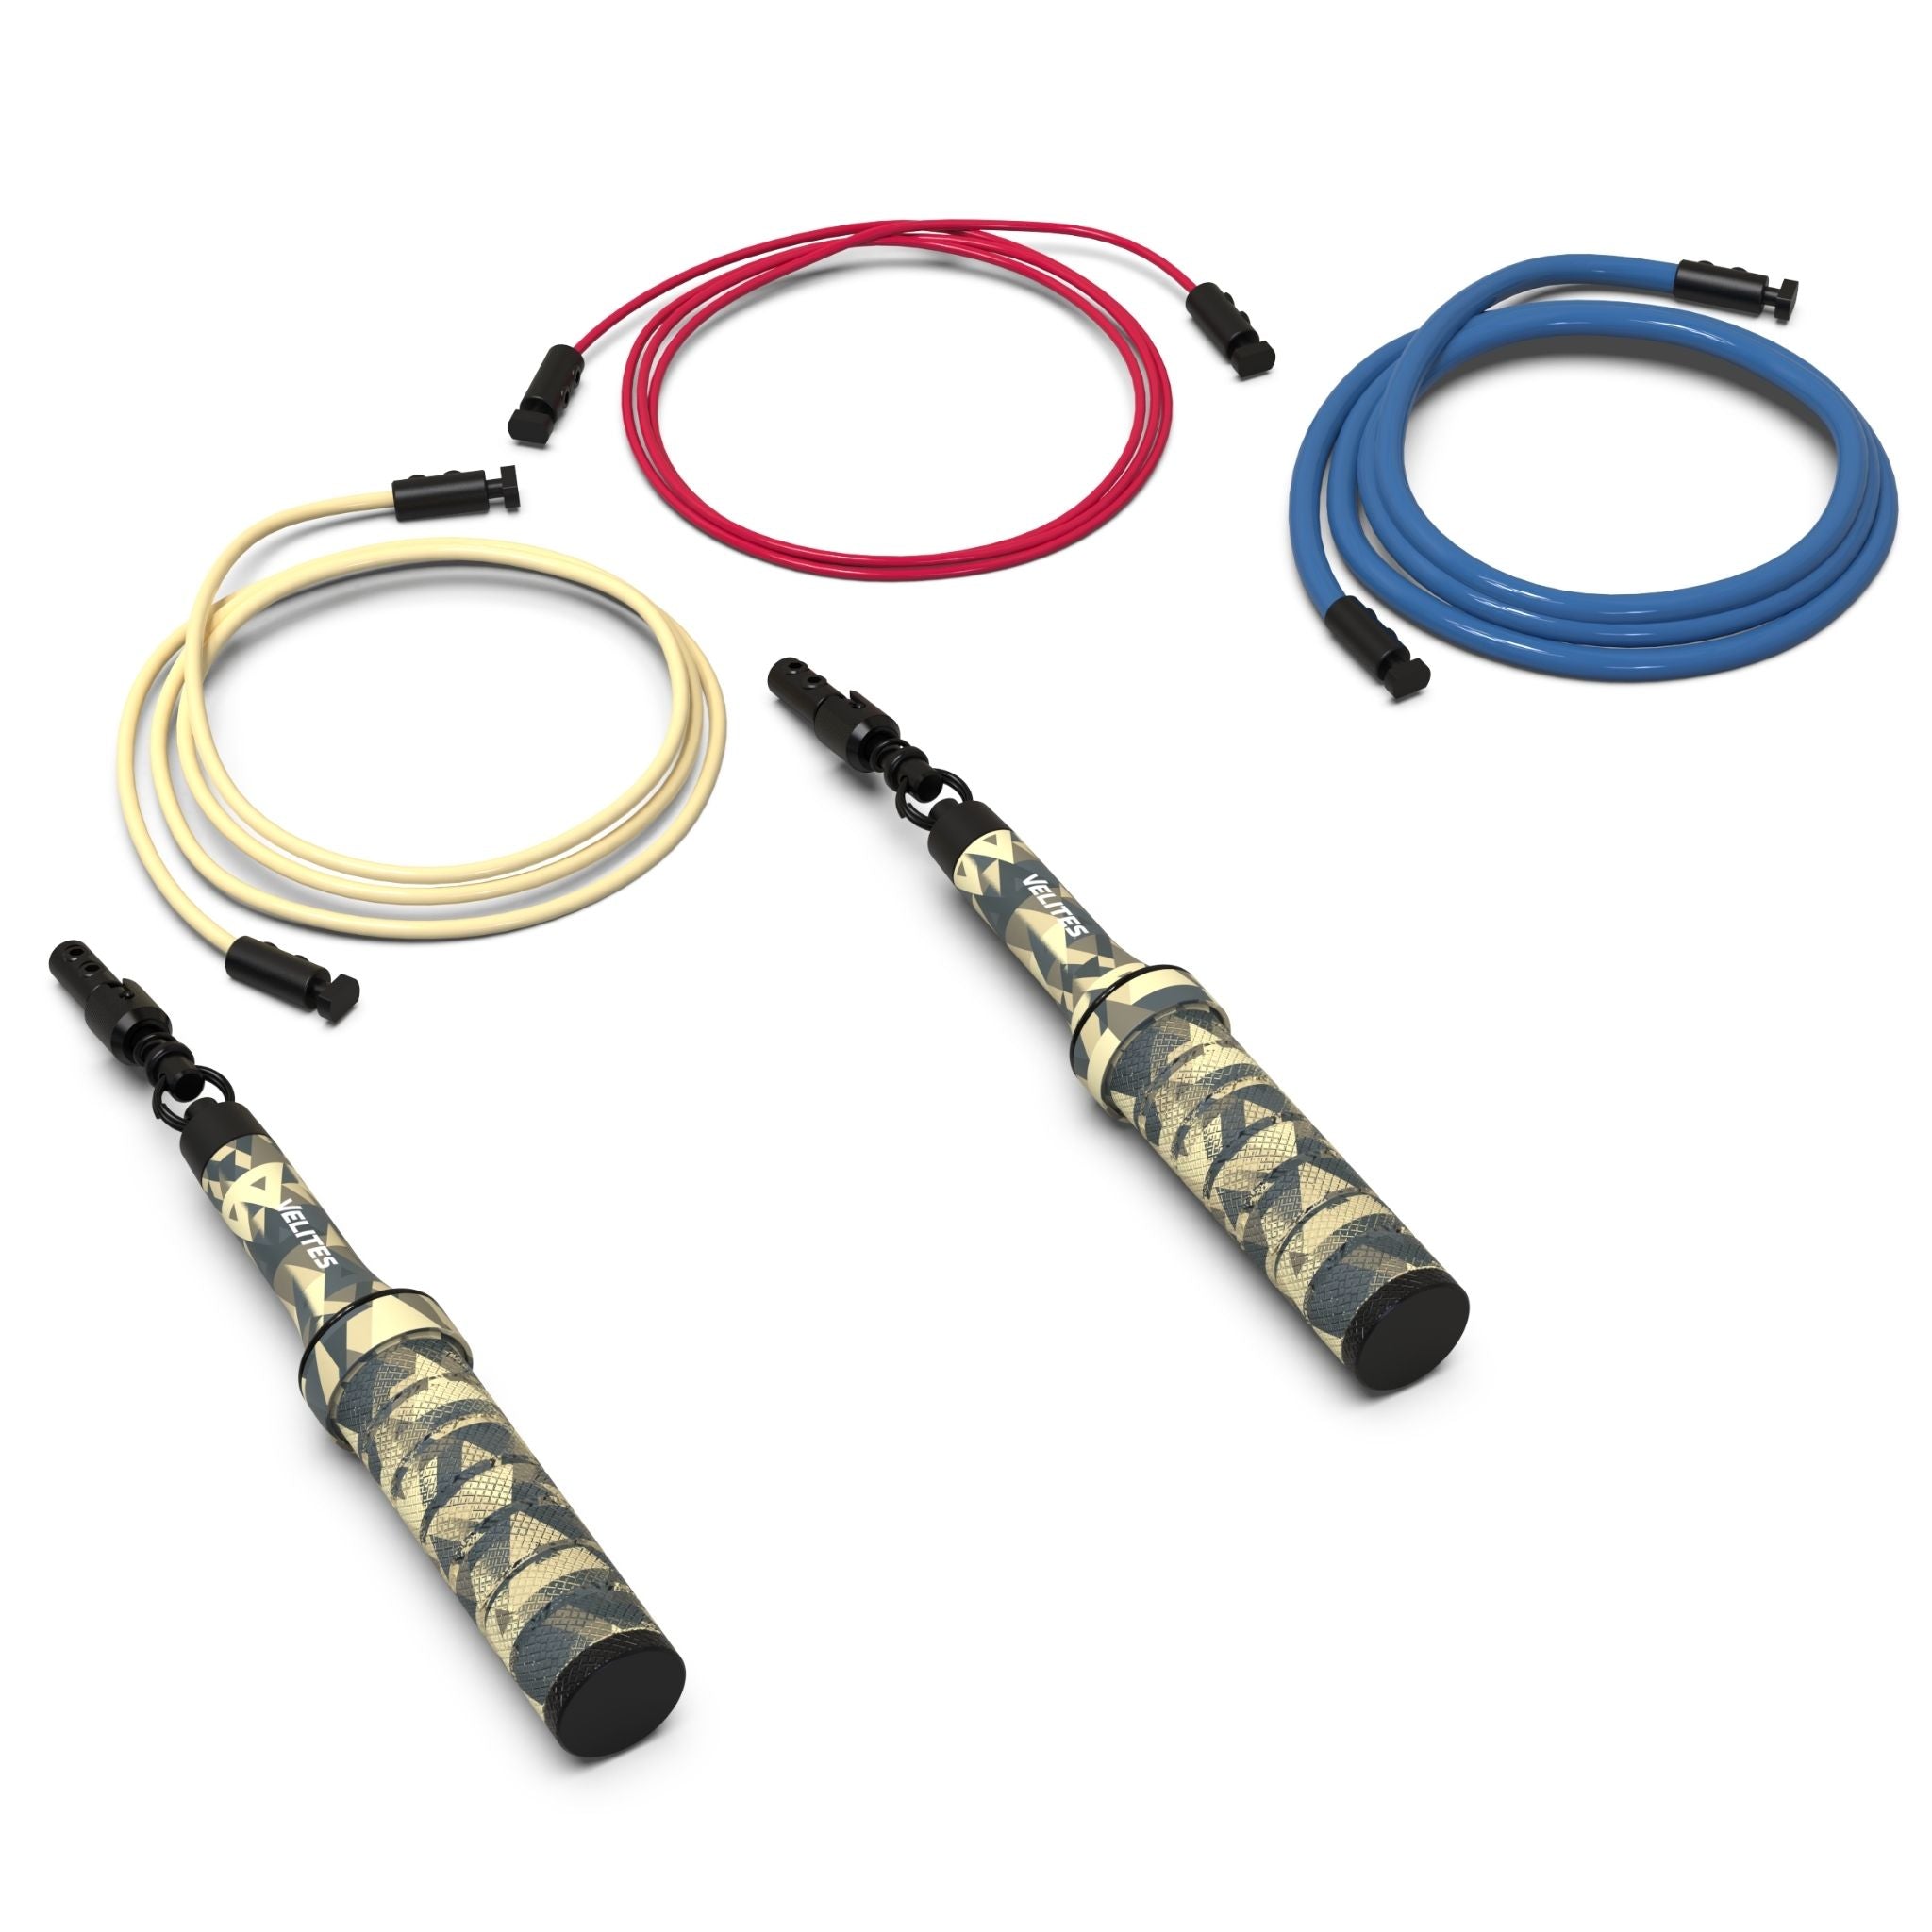 Pack Comba Earth 2.0 Velites + Cables  MKP